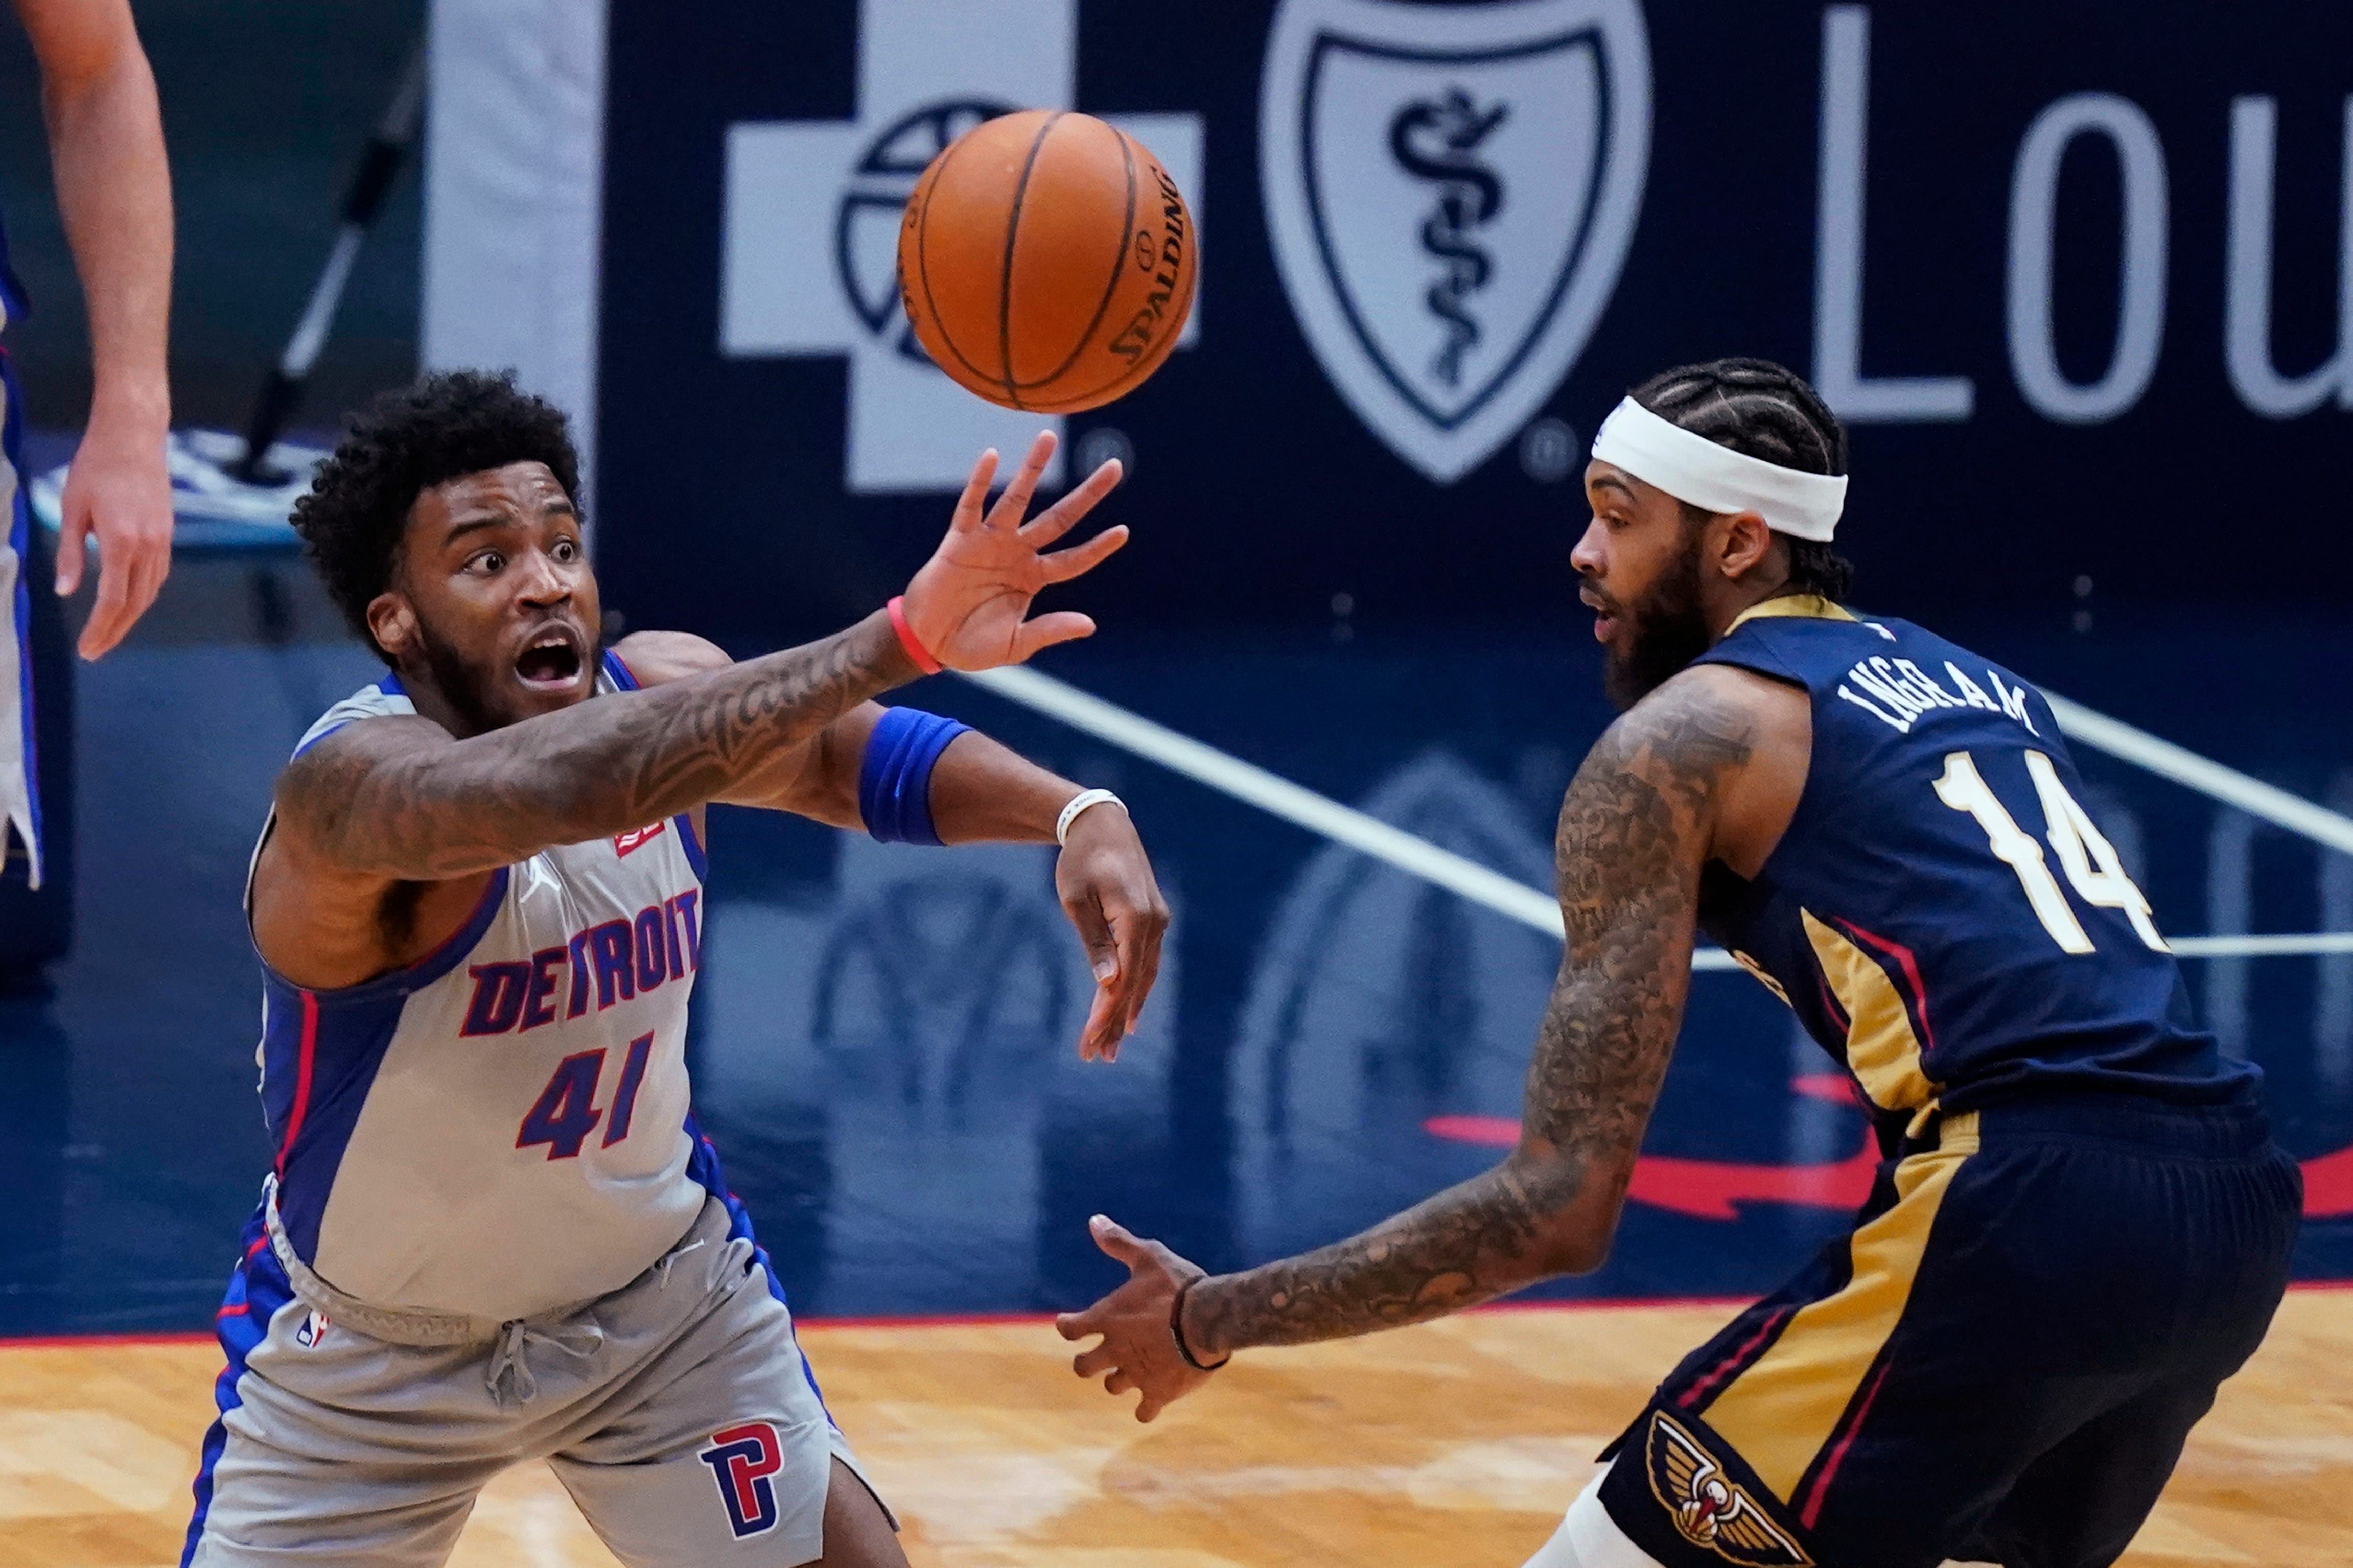 Detroit Pistons forward Saddiq Bey (41) steals the ball from New Orleans Pelicans forward Brandon Ingram (14) during the first half of an NBA basketball game in New Orleans, Wednesday, Feb. 24, 2021.